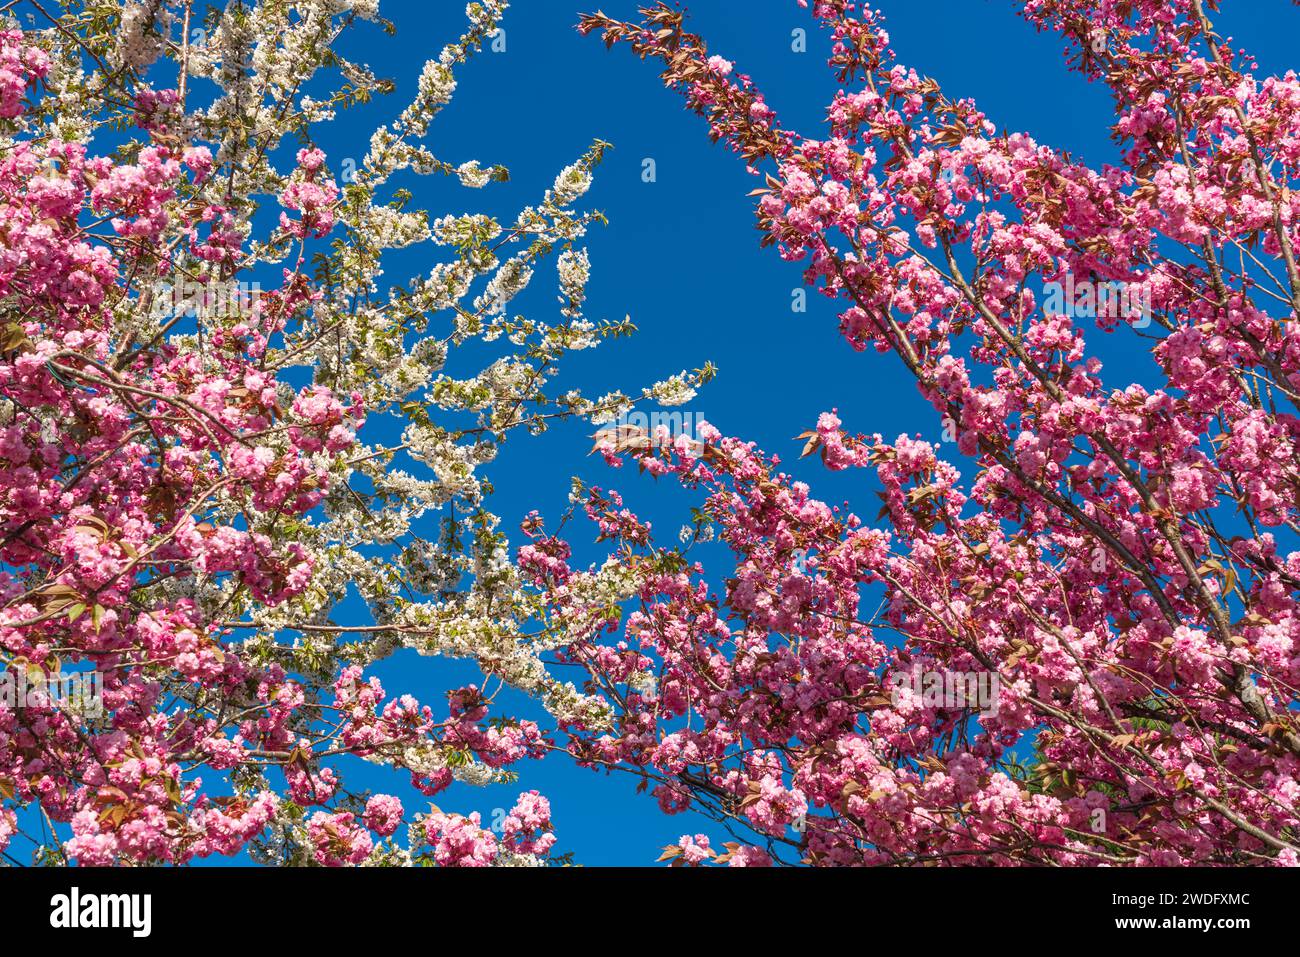 Cherry trees in full bloom in victoria, Vancouver Island, British Columbia, Canada. Stock Photo